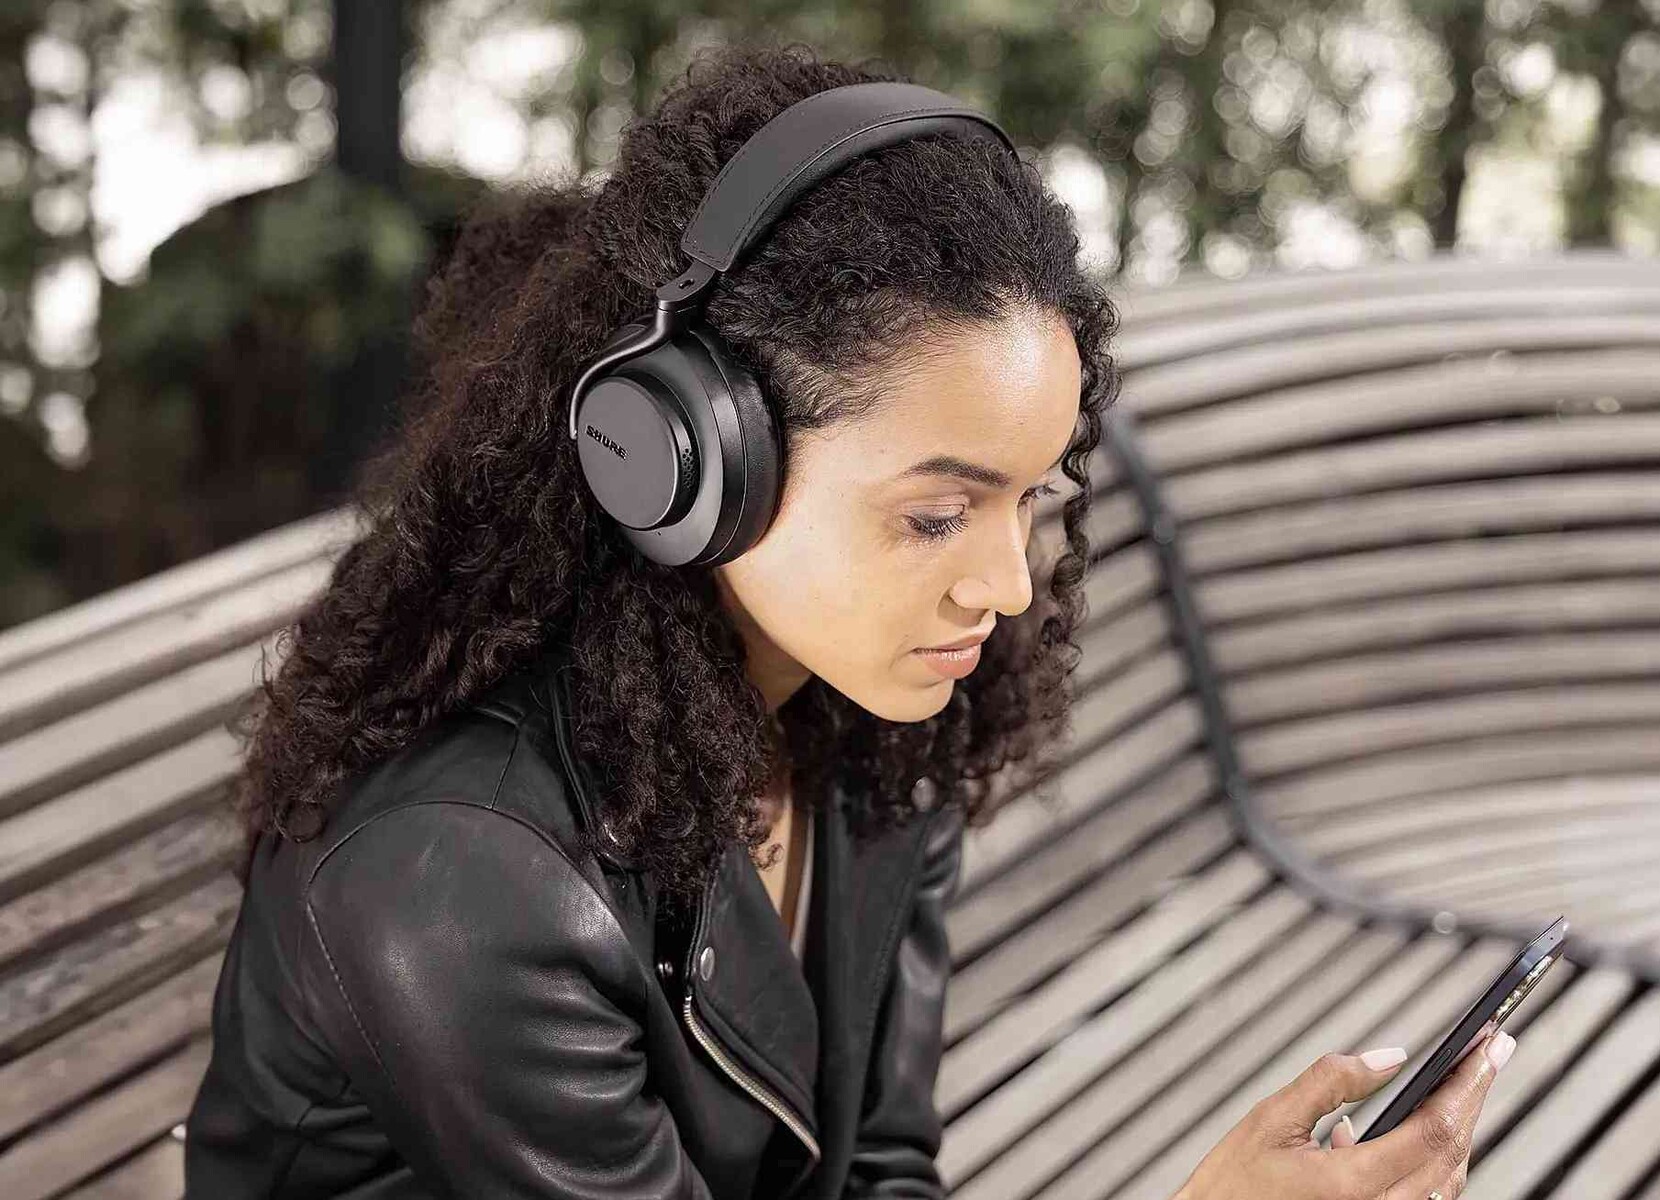 Shure AONIC 50 Gen 2 ANC headphones launch with spatial audio and